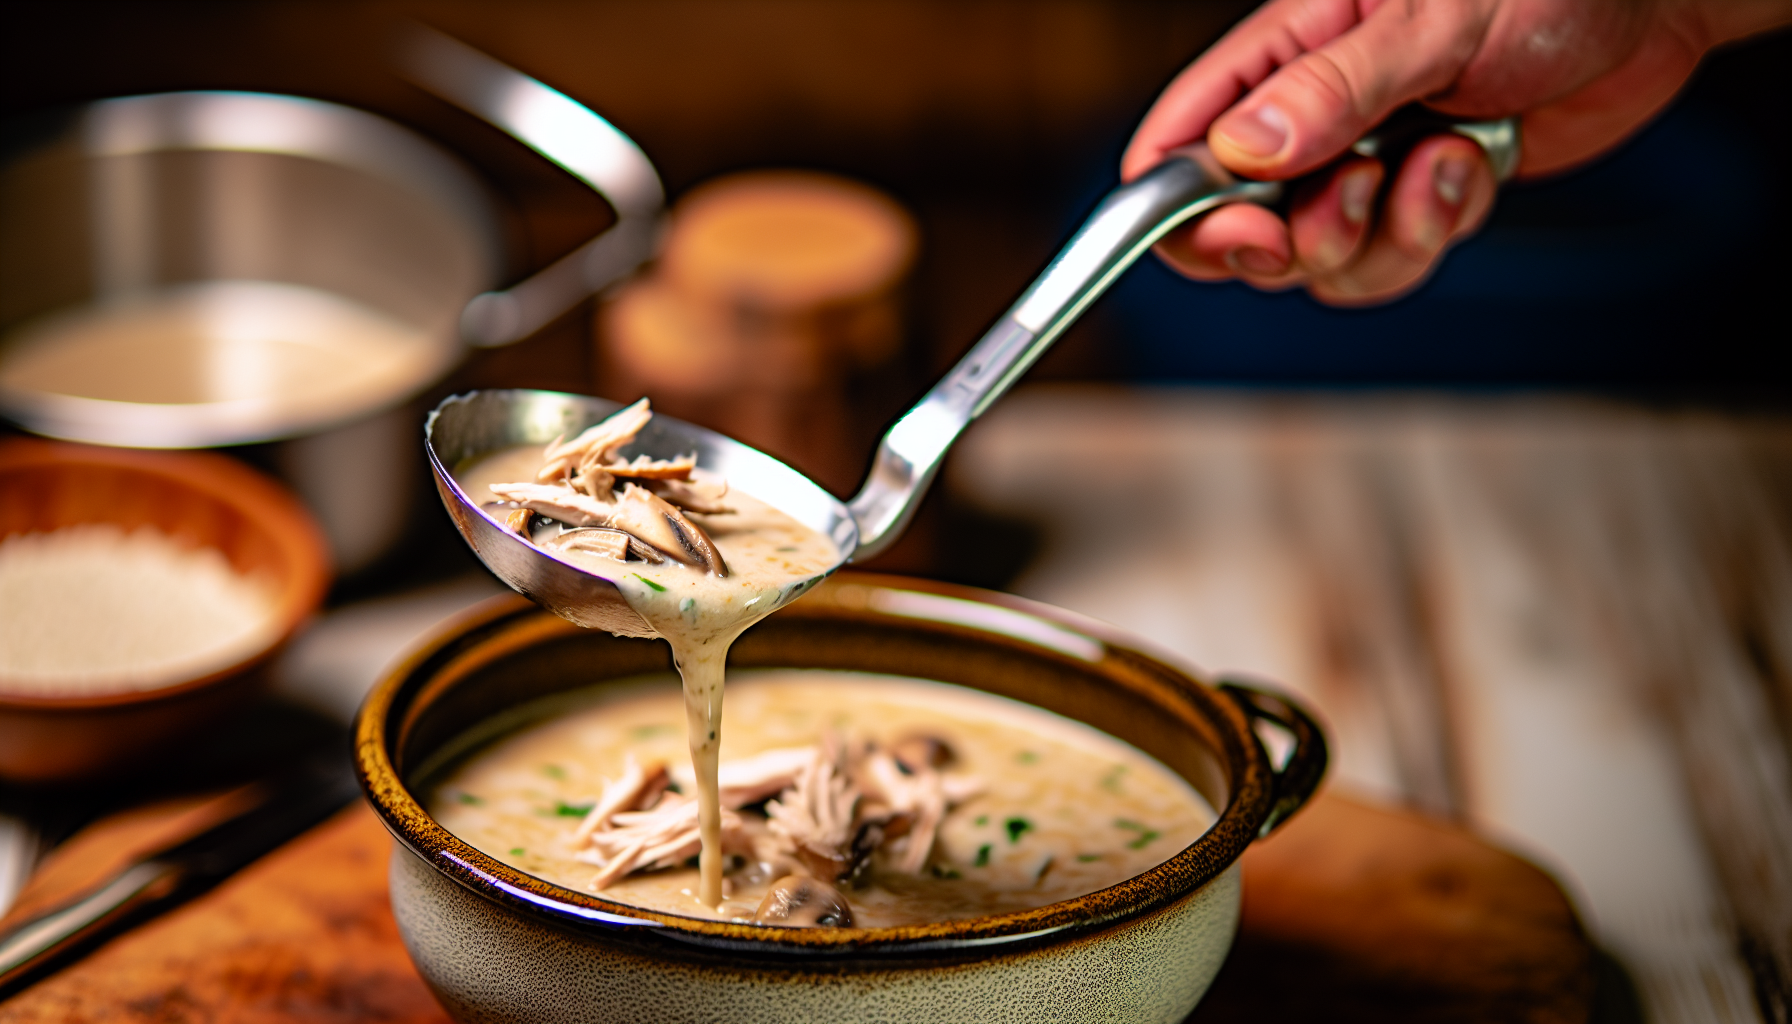 A creamy chicken mushroom soup being poured into a serving bowl